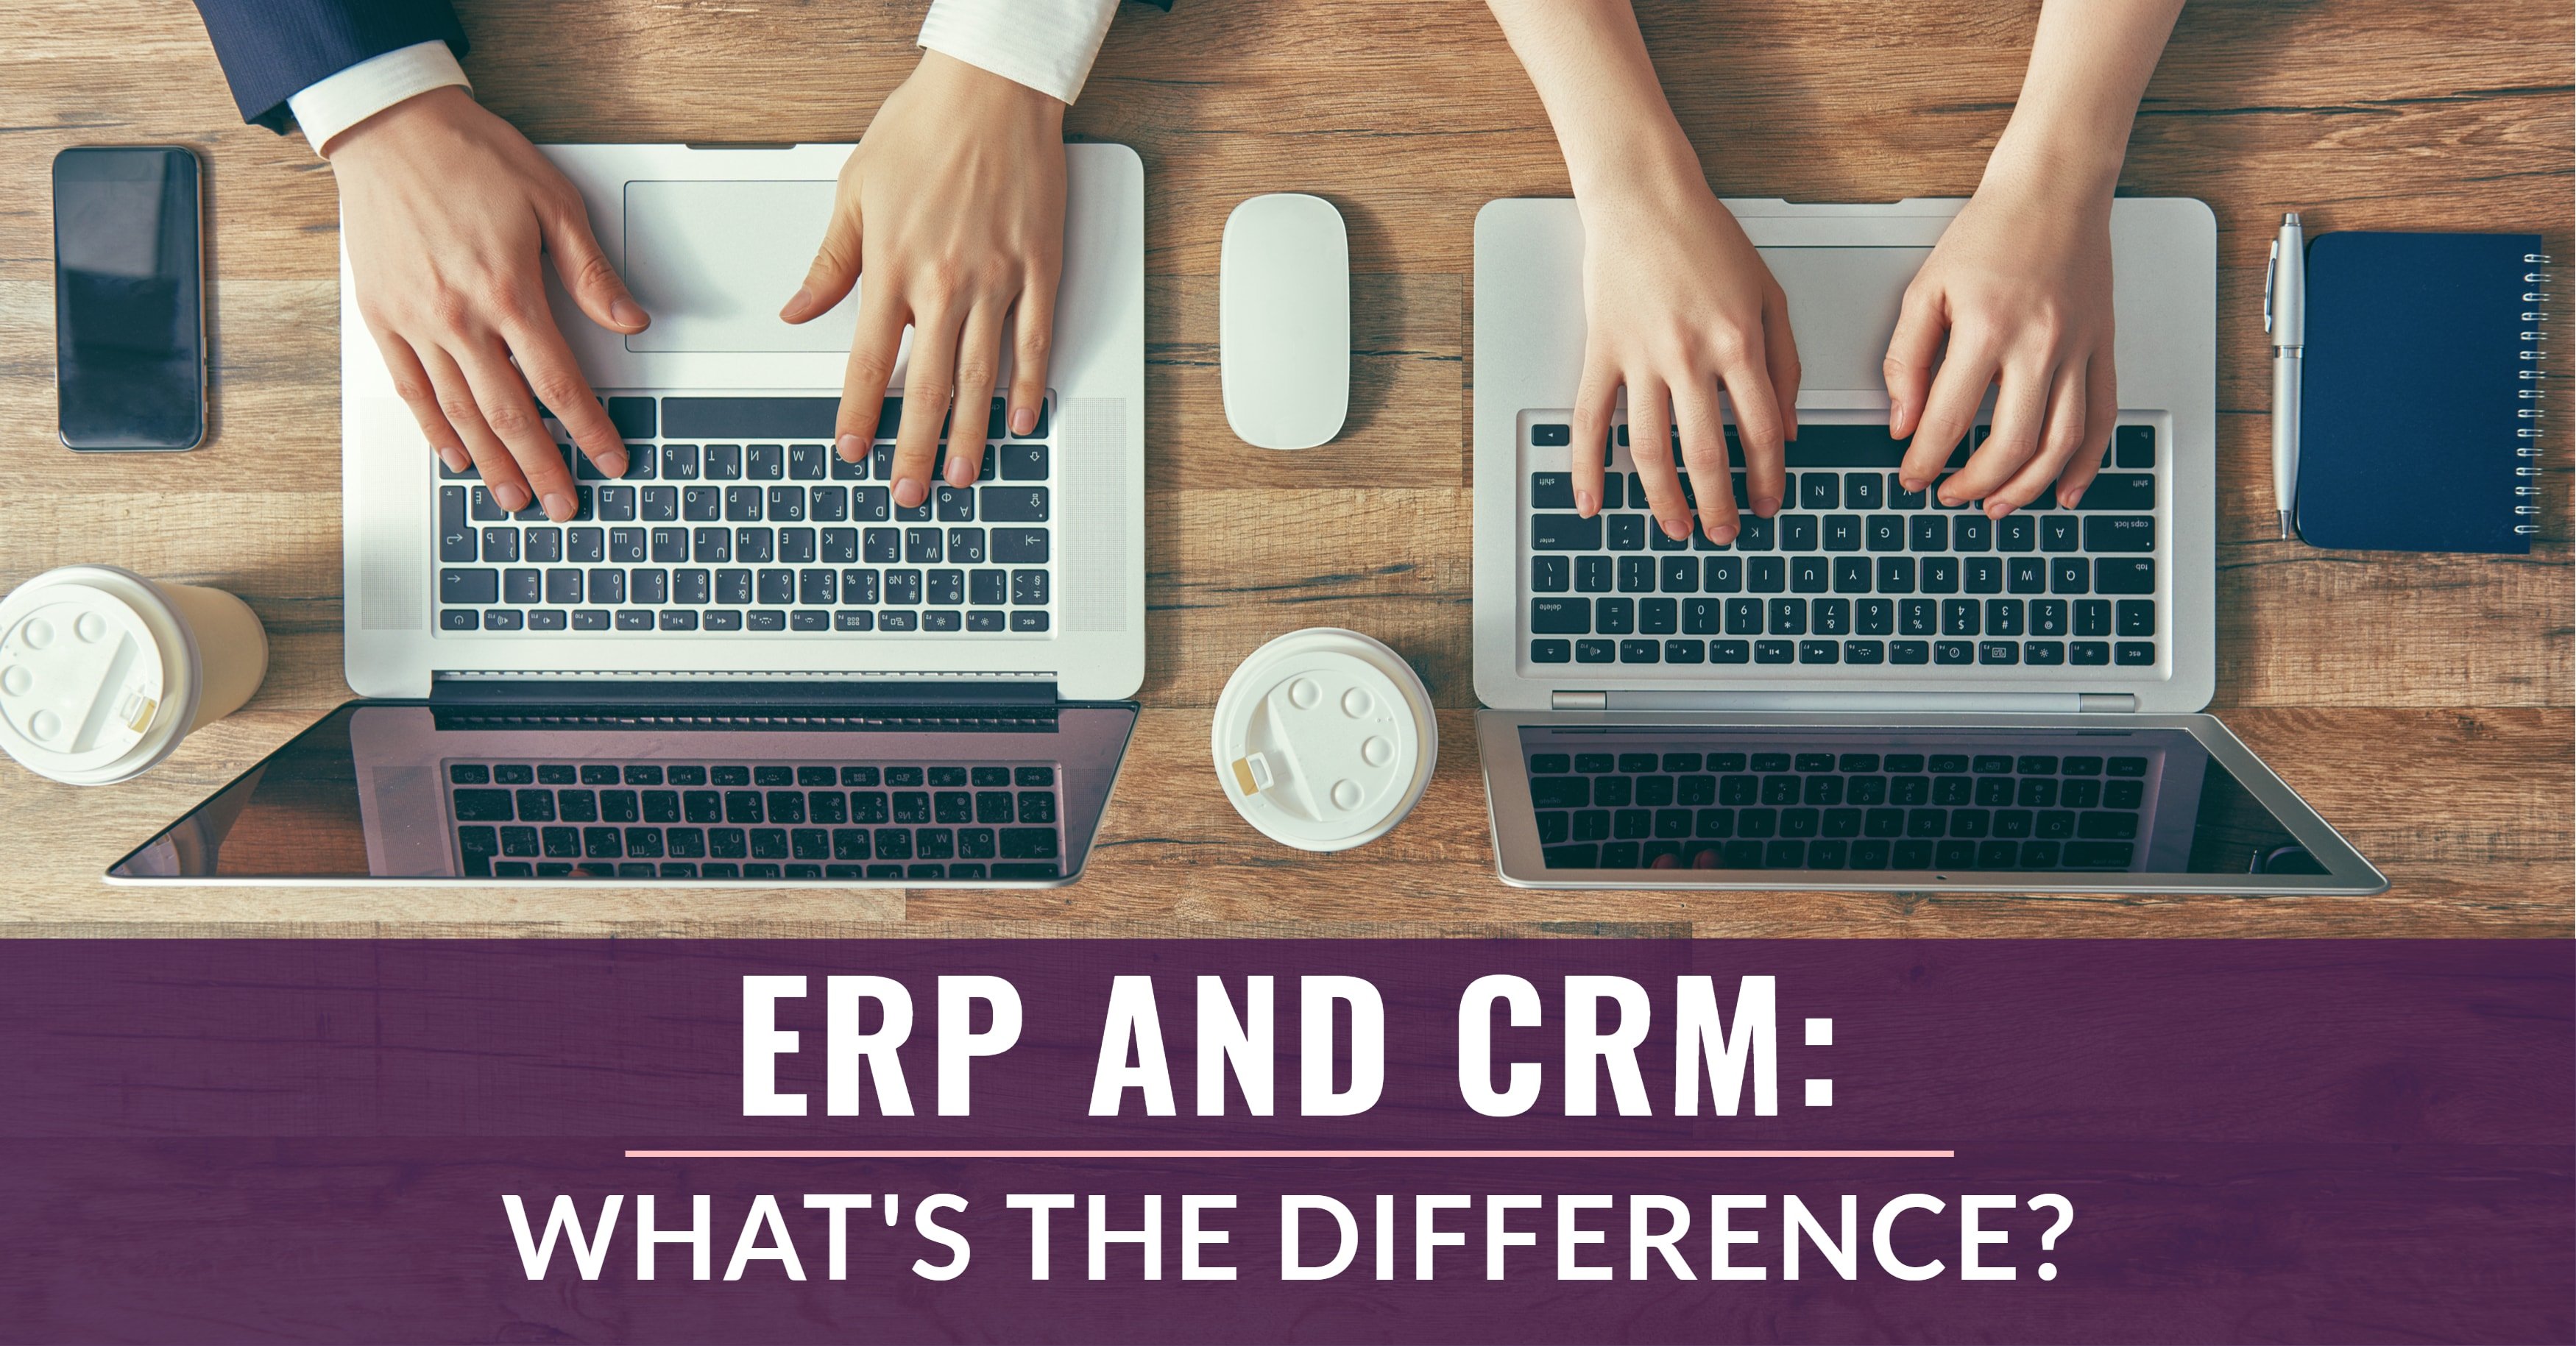 What's the Difference Between ERP and CRM?